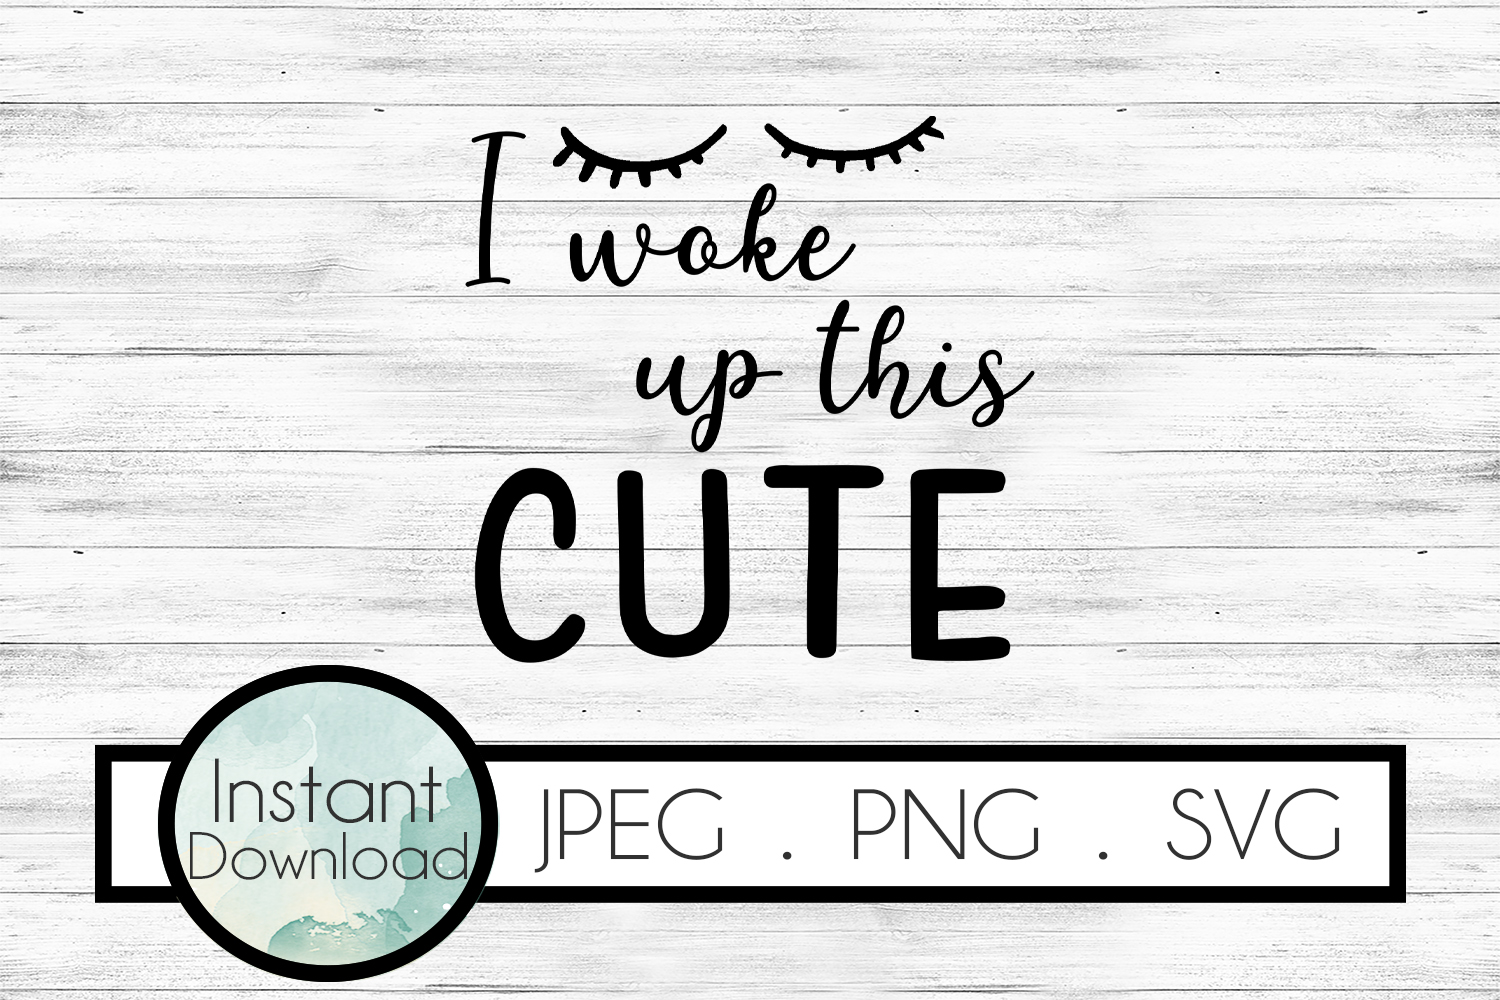 Download I woke up this cute SVG, Baby SVG, Baby Quotes for Onesies